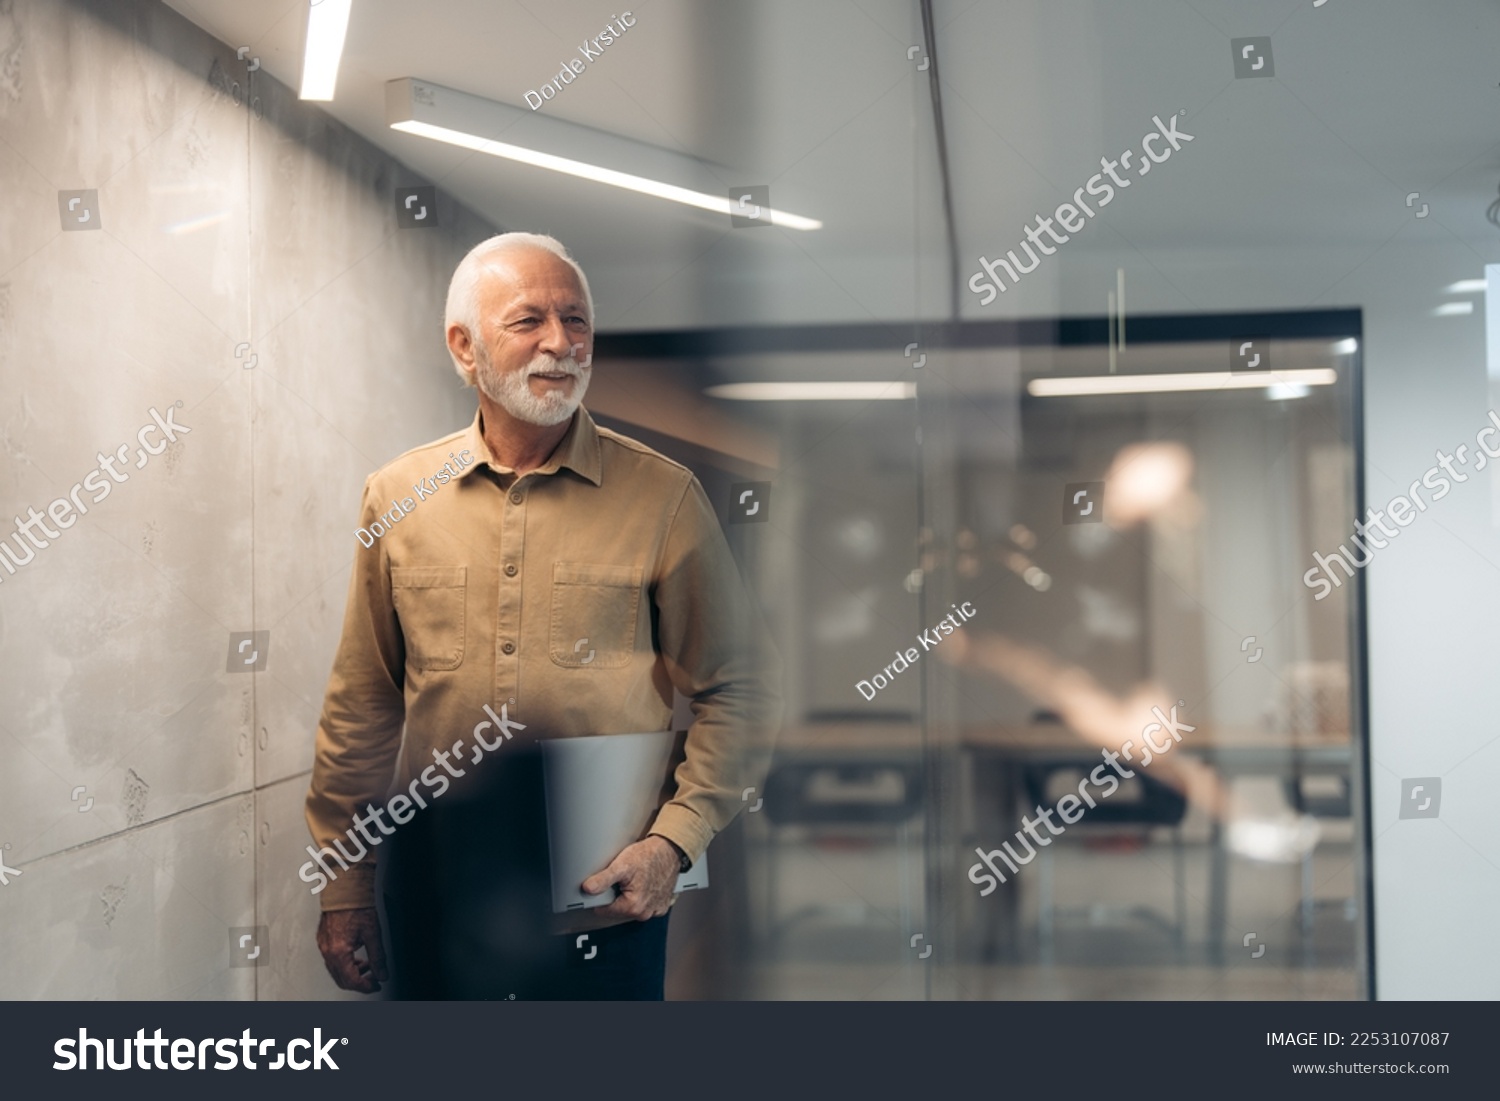 Smiling mature older successful gray-haired businessman leader, thoughtful senior professional businessman holding laptop looking away standing in modern office. #2253107087